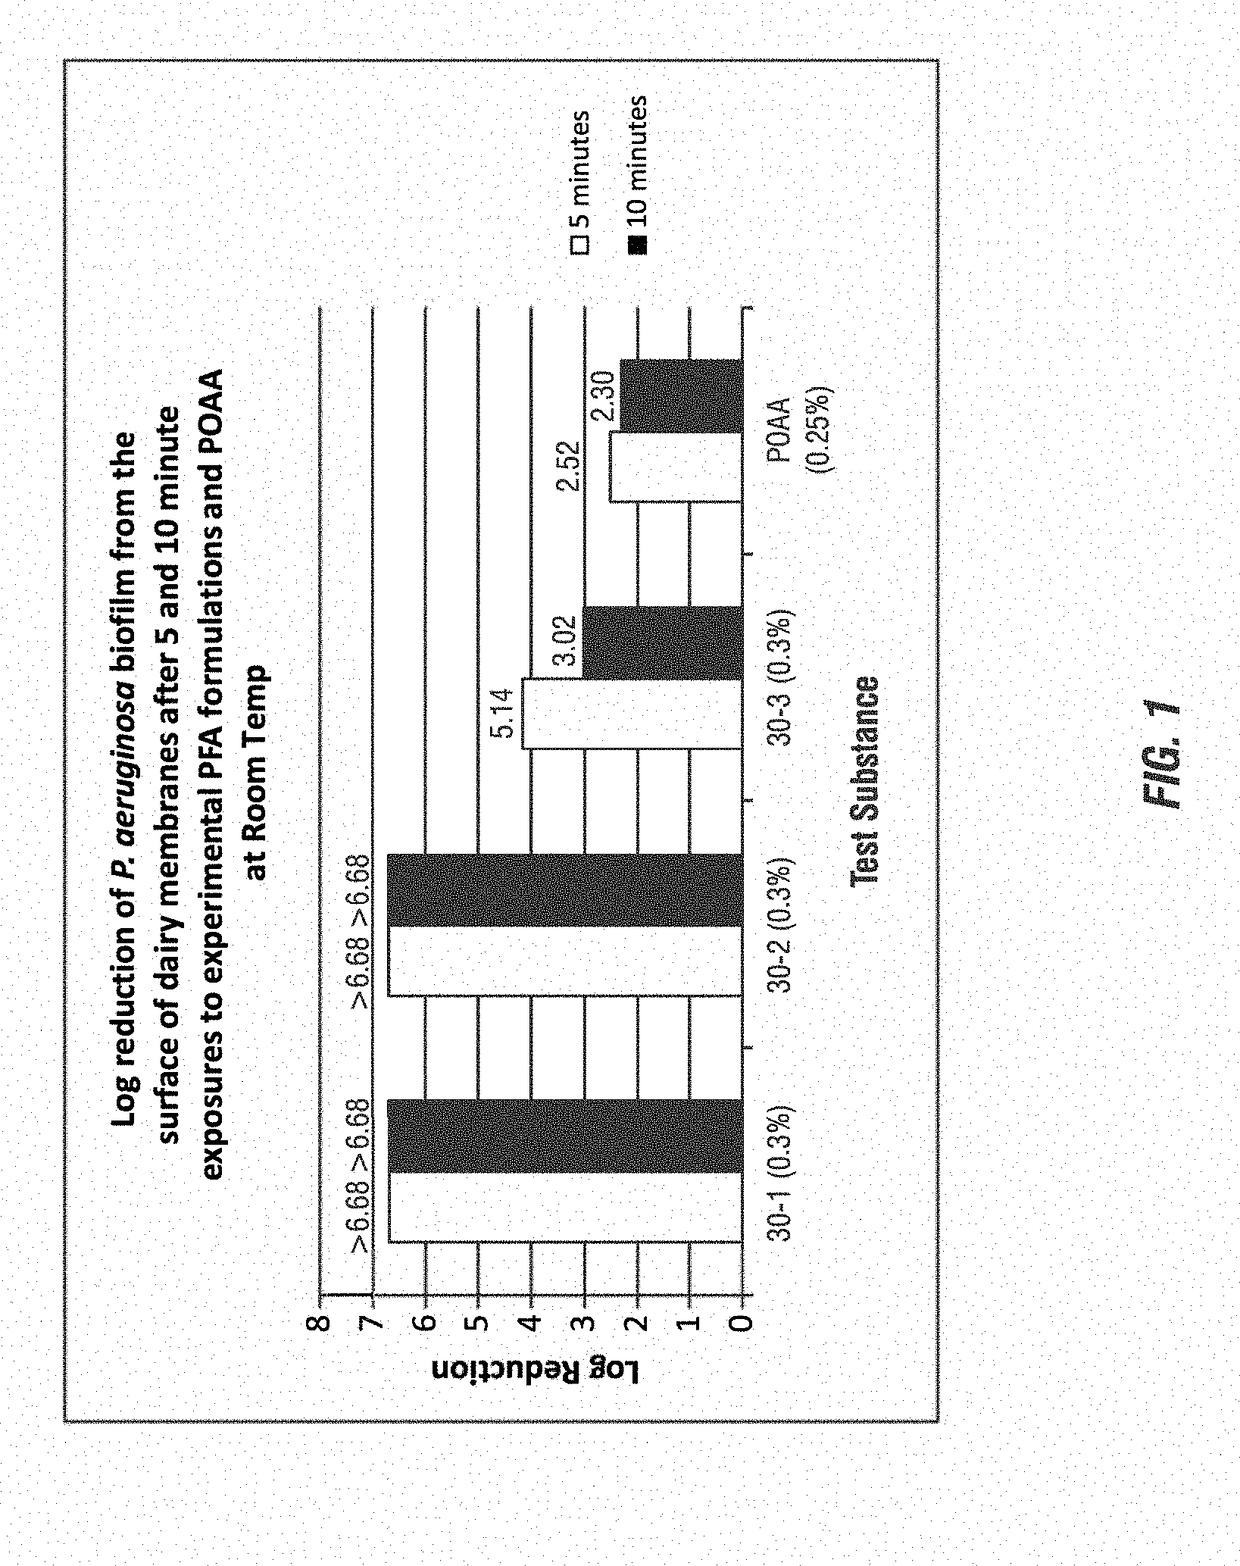 Peroxyformic acid compositions for membrane filtration cleaning in energy services